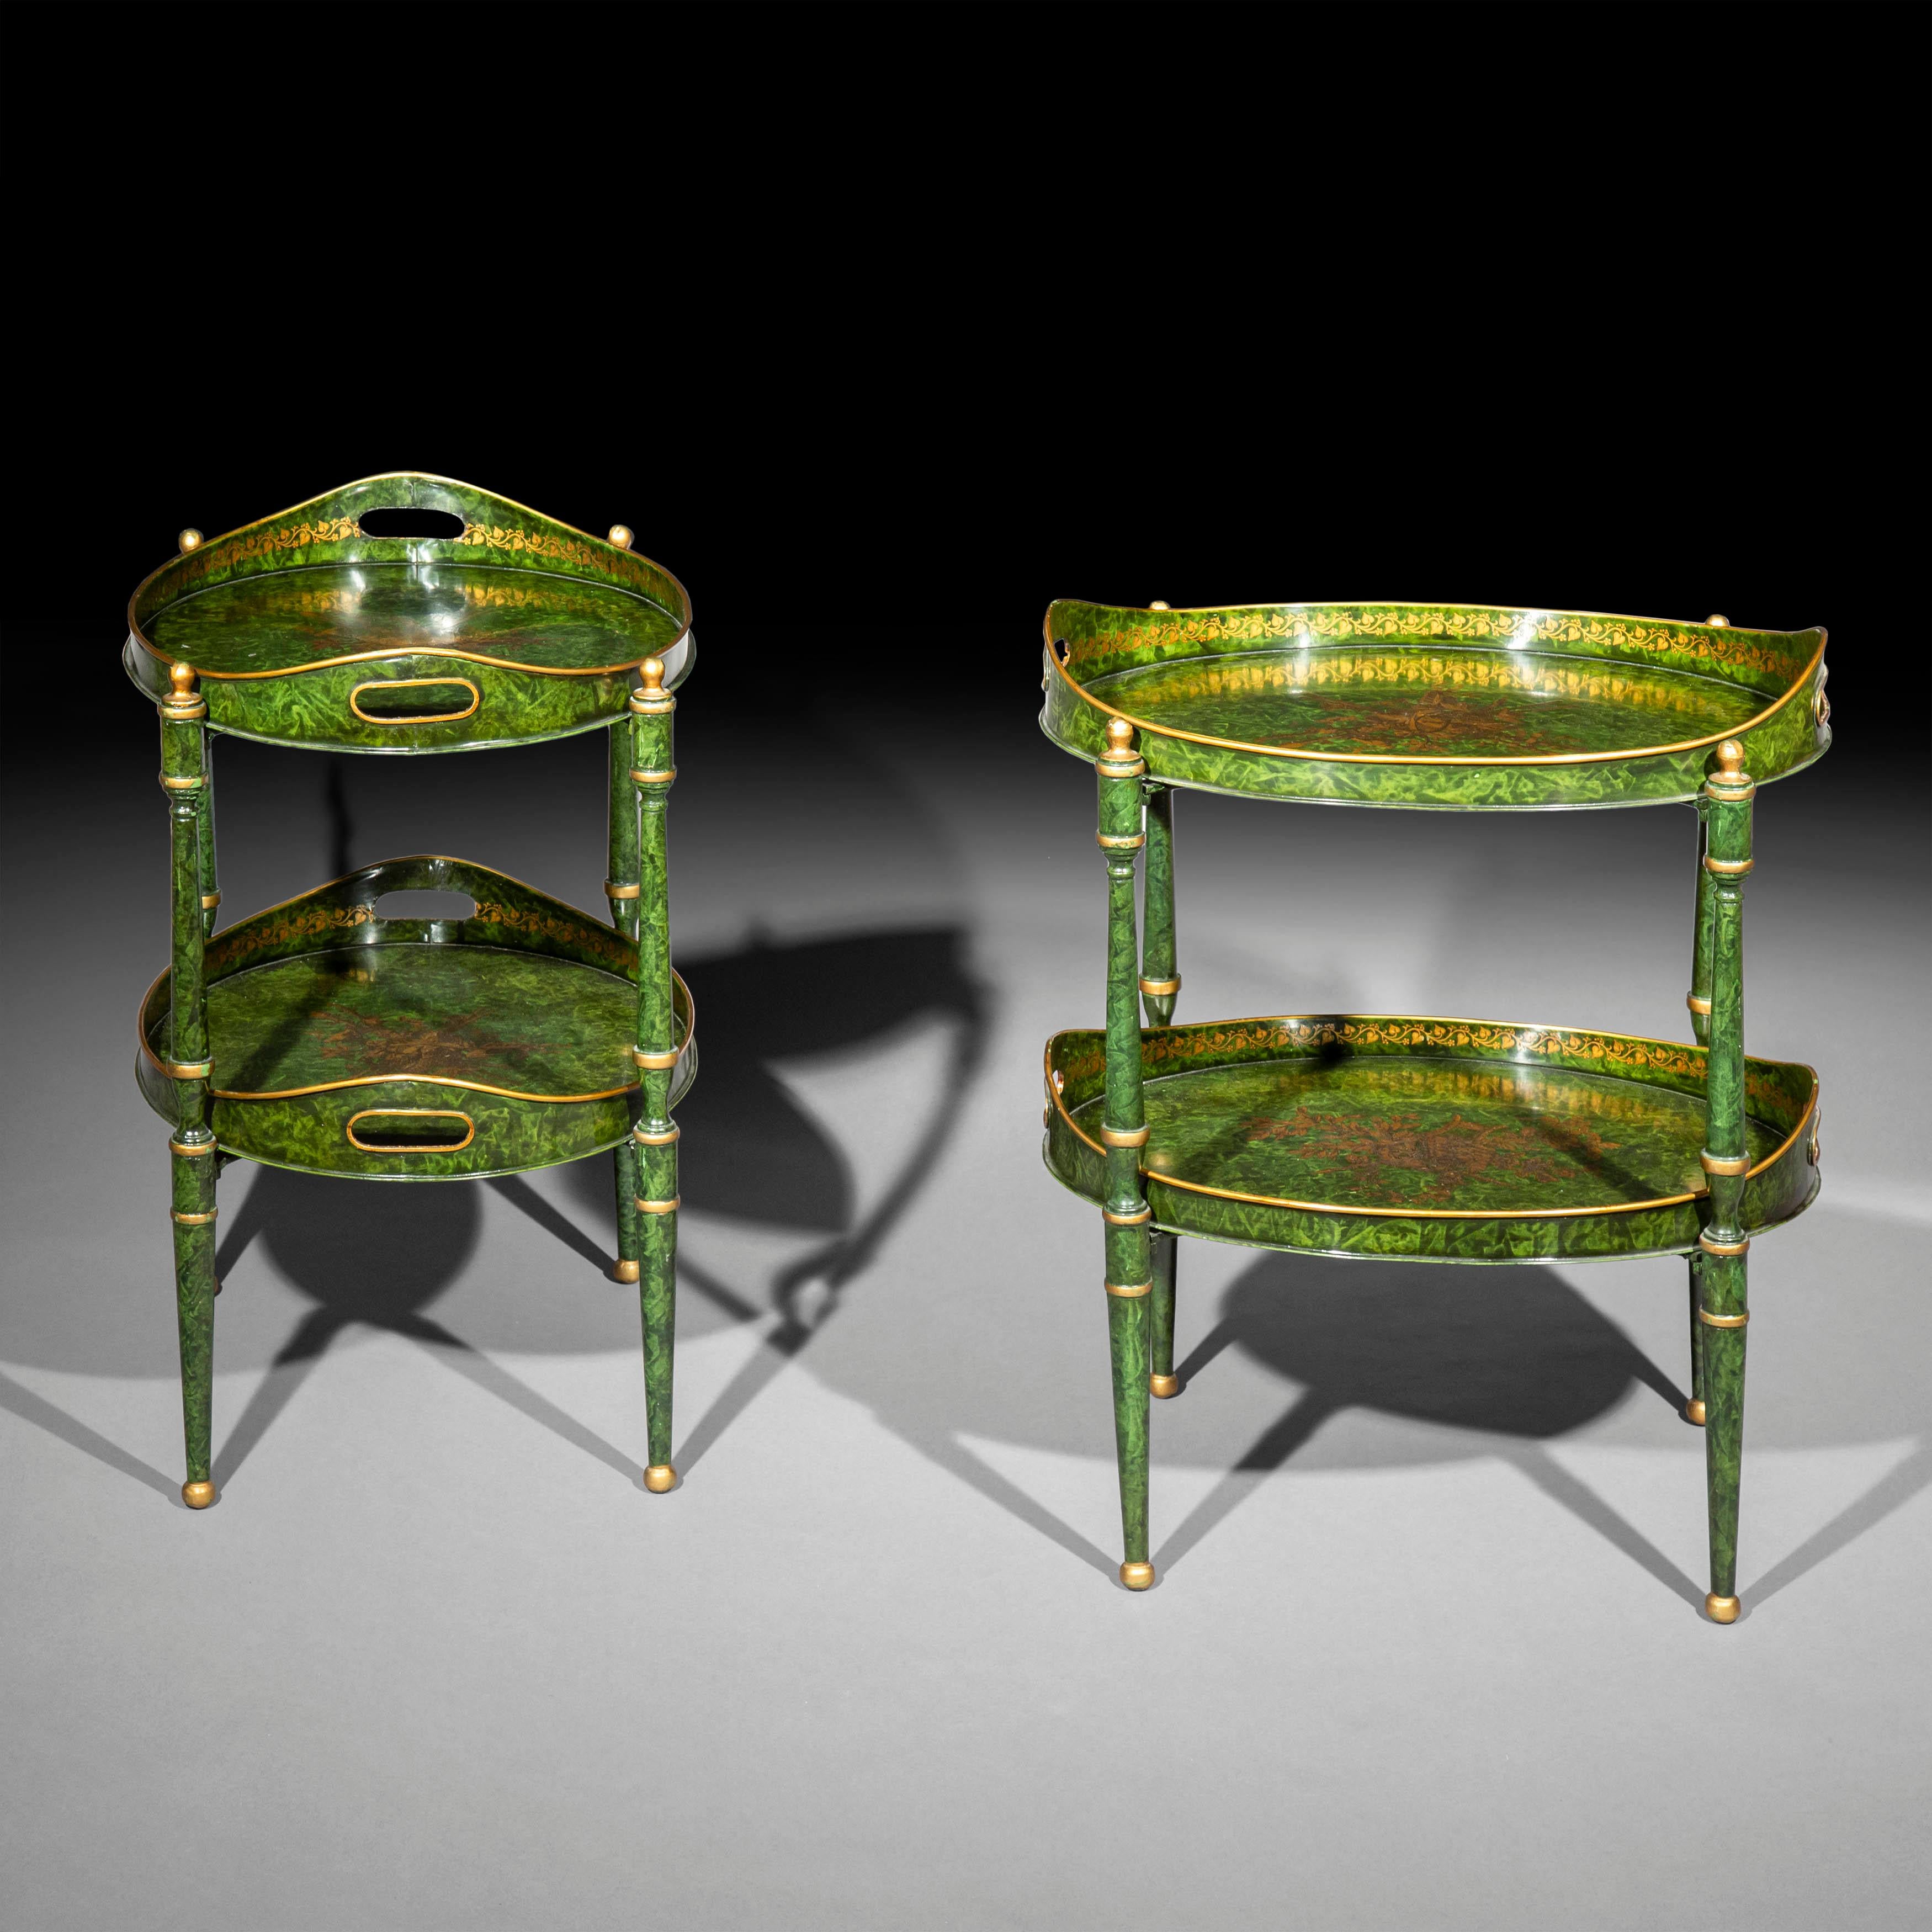 Chinoiserie Pair of Toleware Side Tables or Étagères